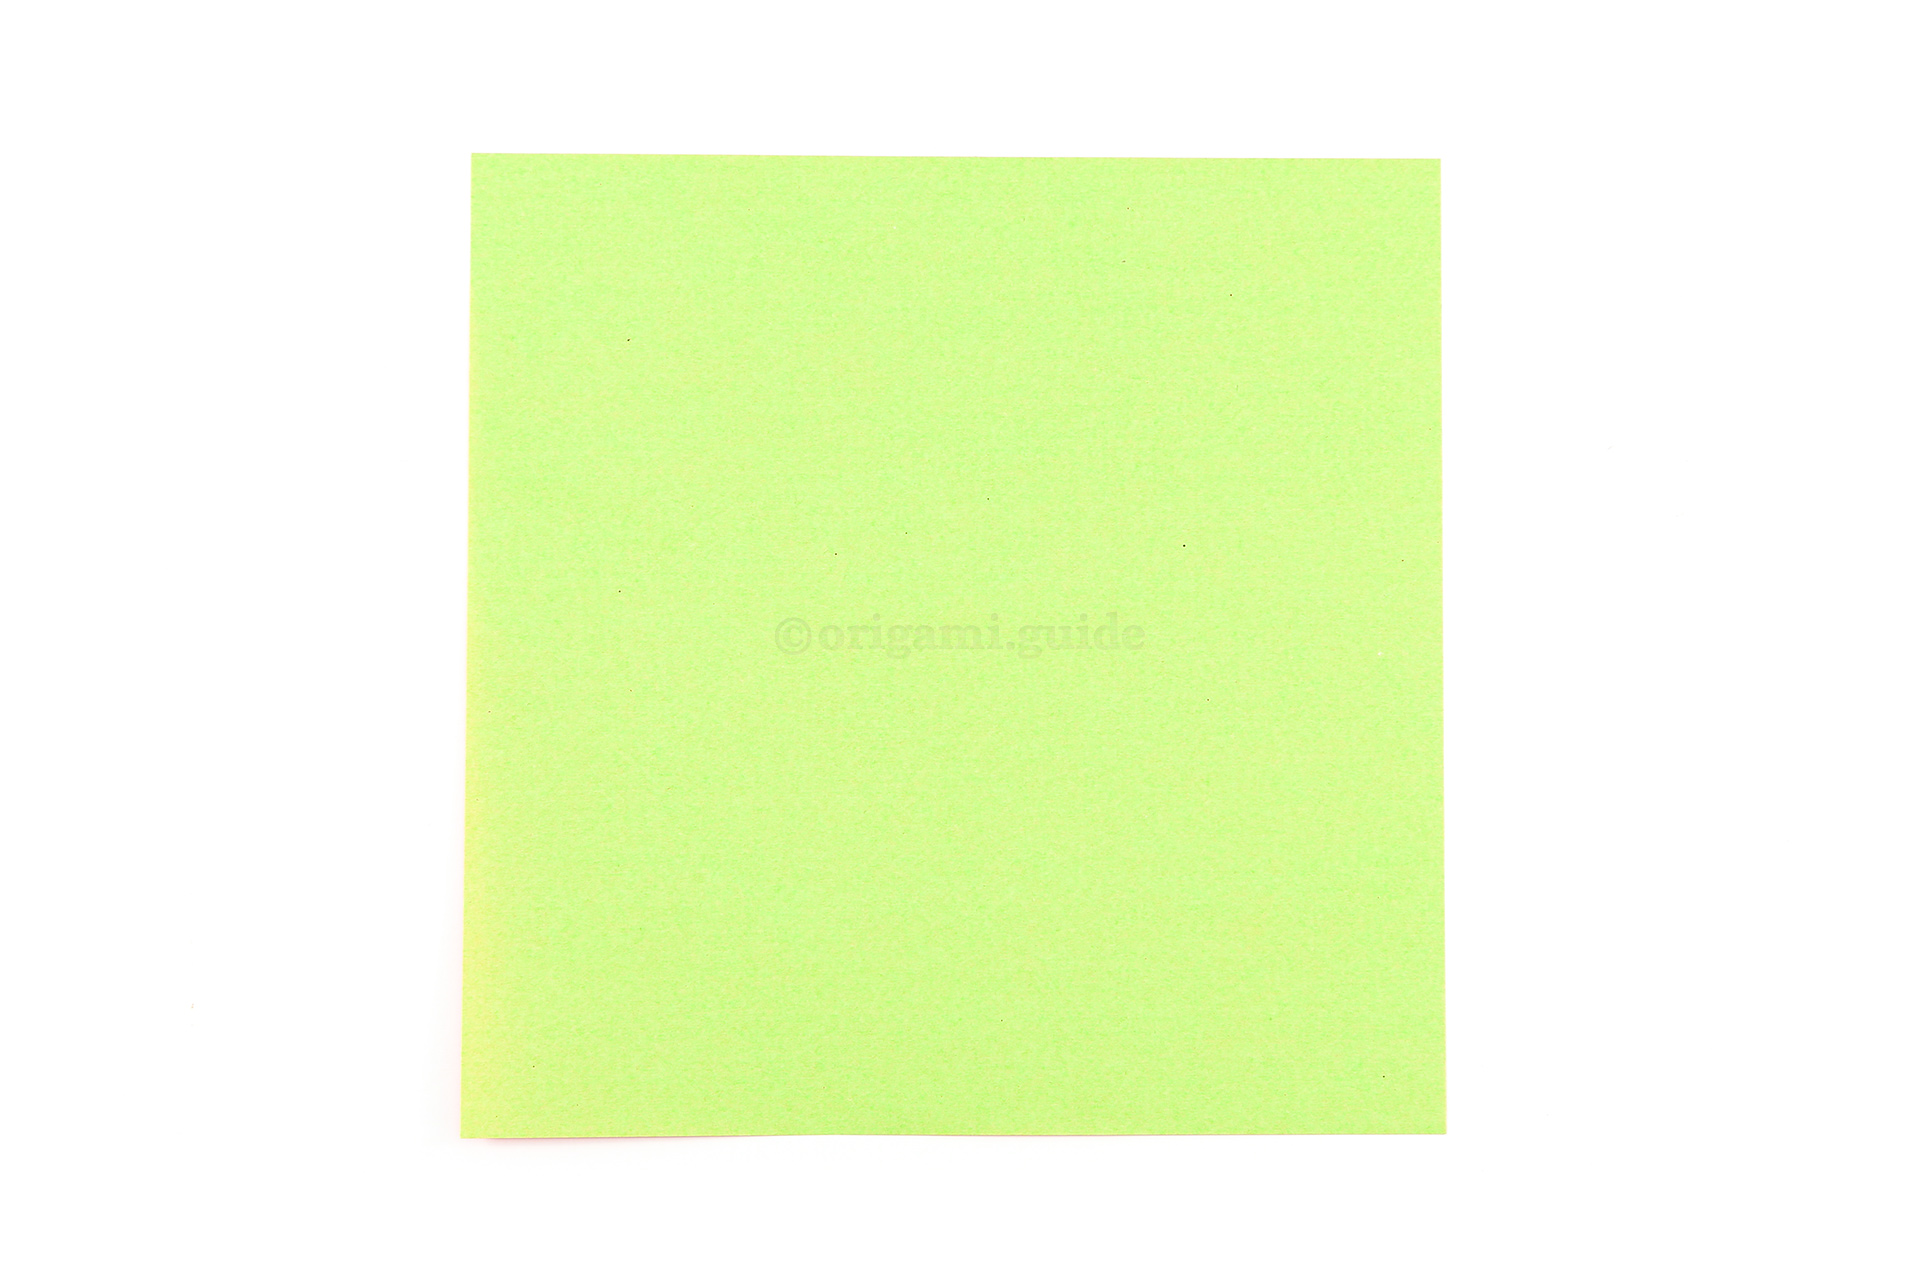 This is the back of our origami paper which is often white, you will not see this colour on your finished flower.